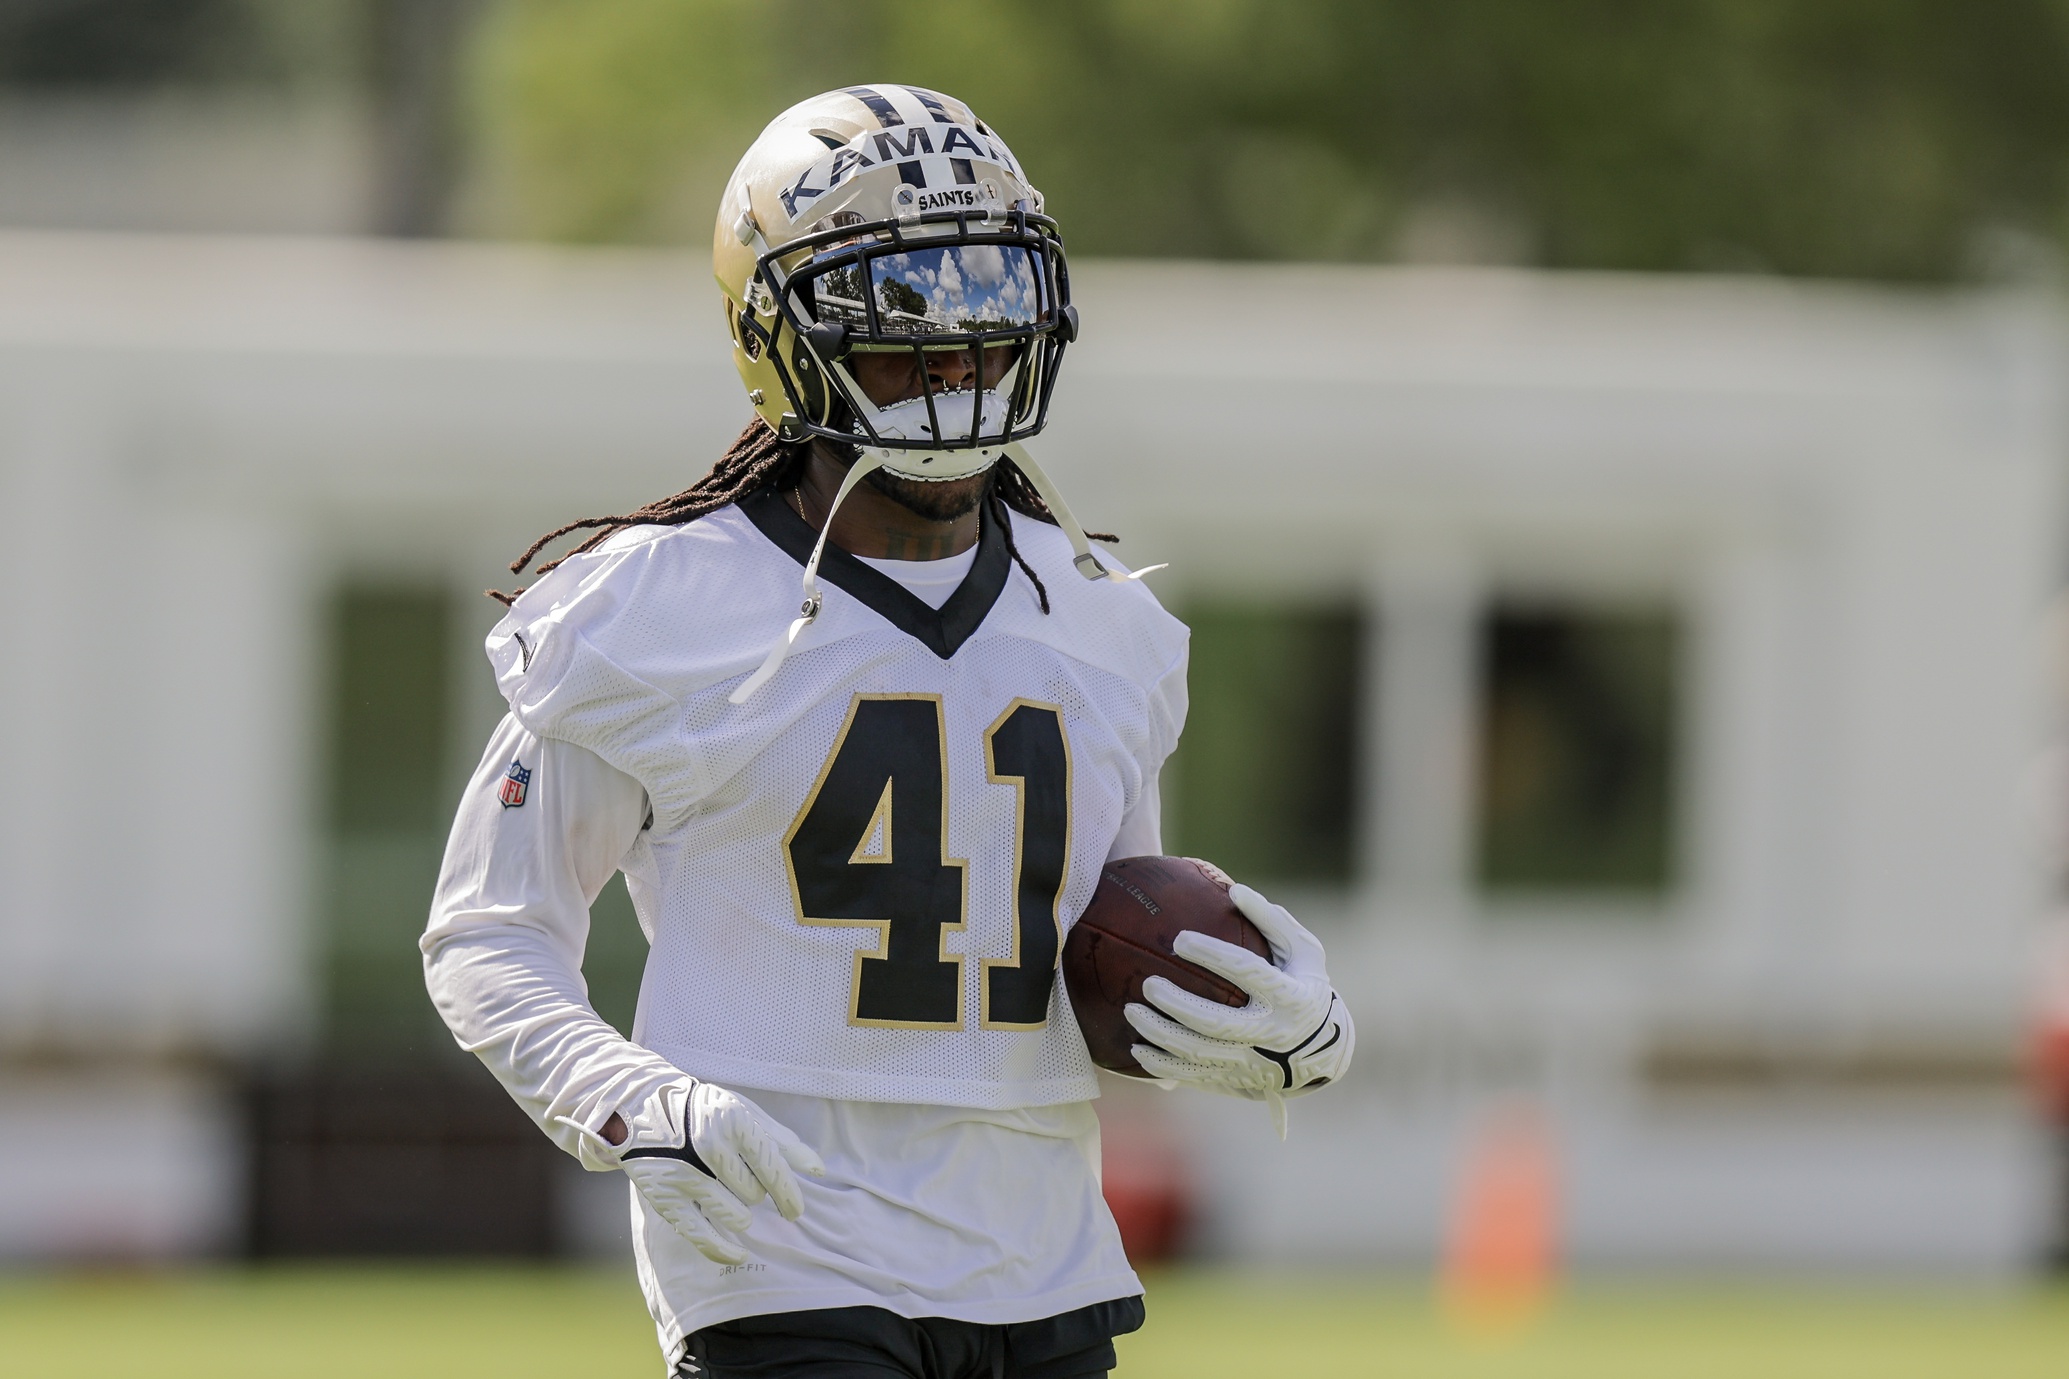 2021 Fantasy RB Draft Guide: What You Need To Know About Alvin Kamara,  Austin Ekeler, More Top 12 RBs In ADP